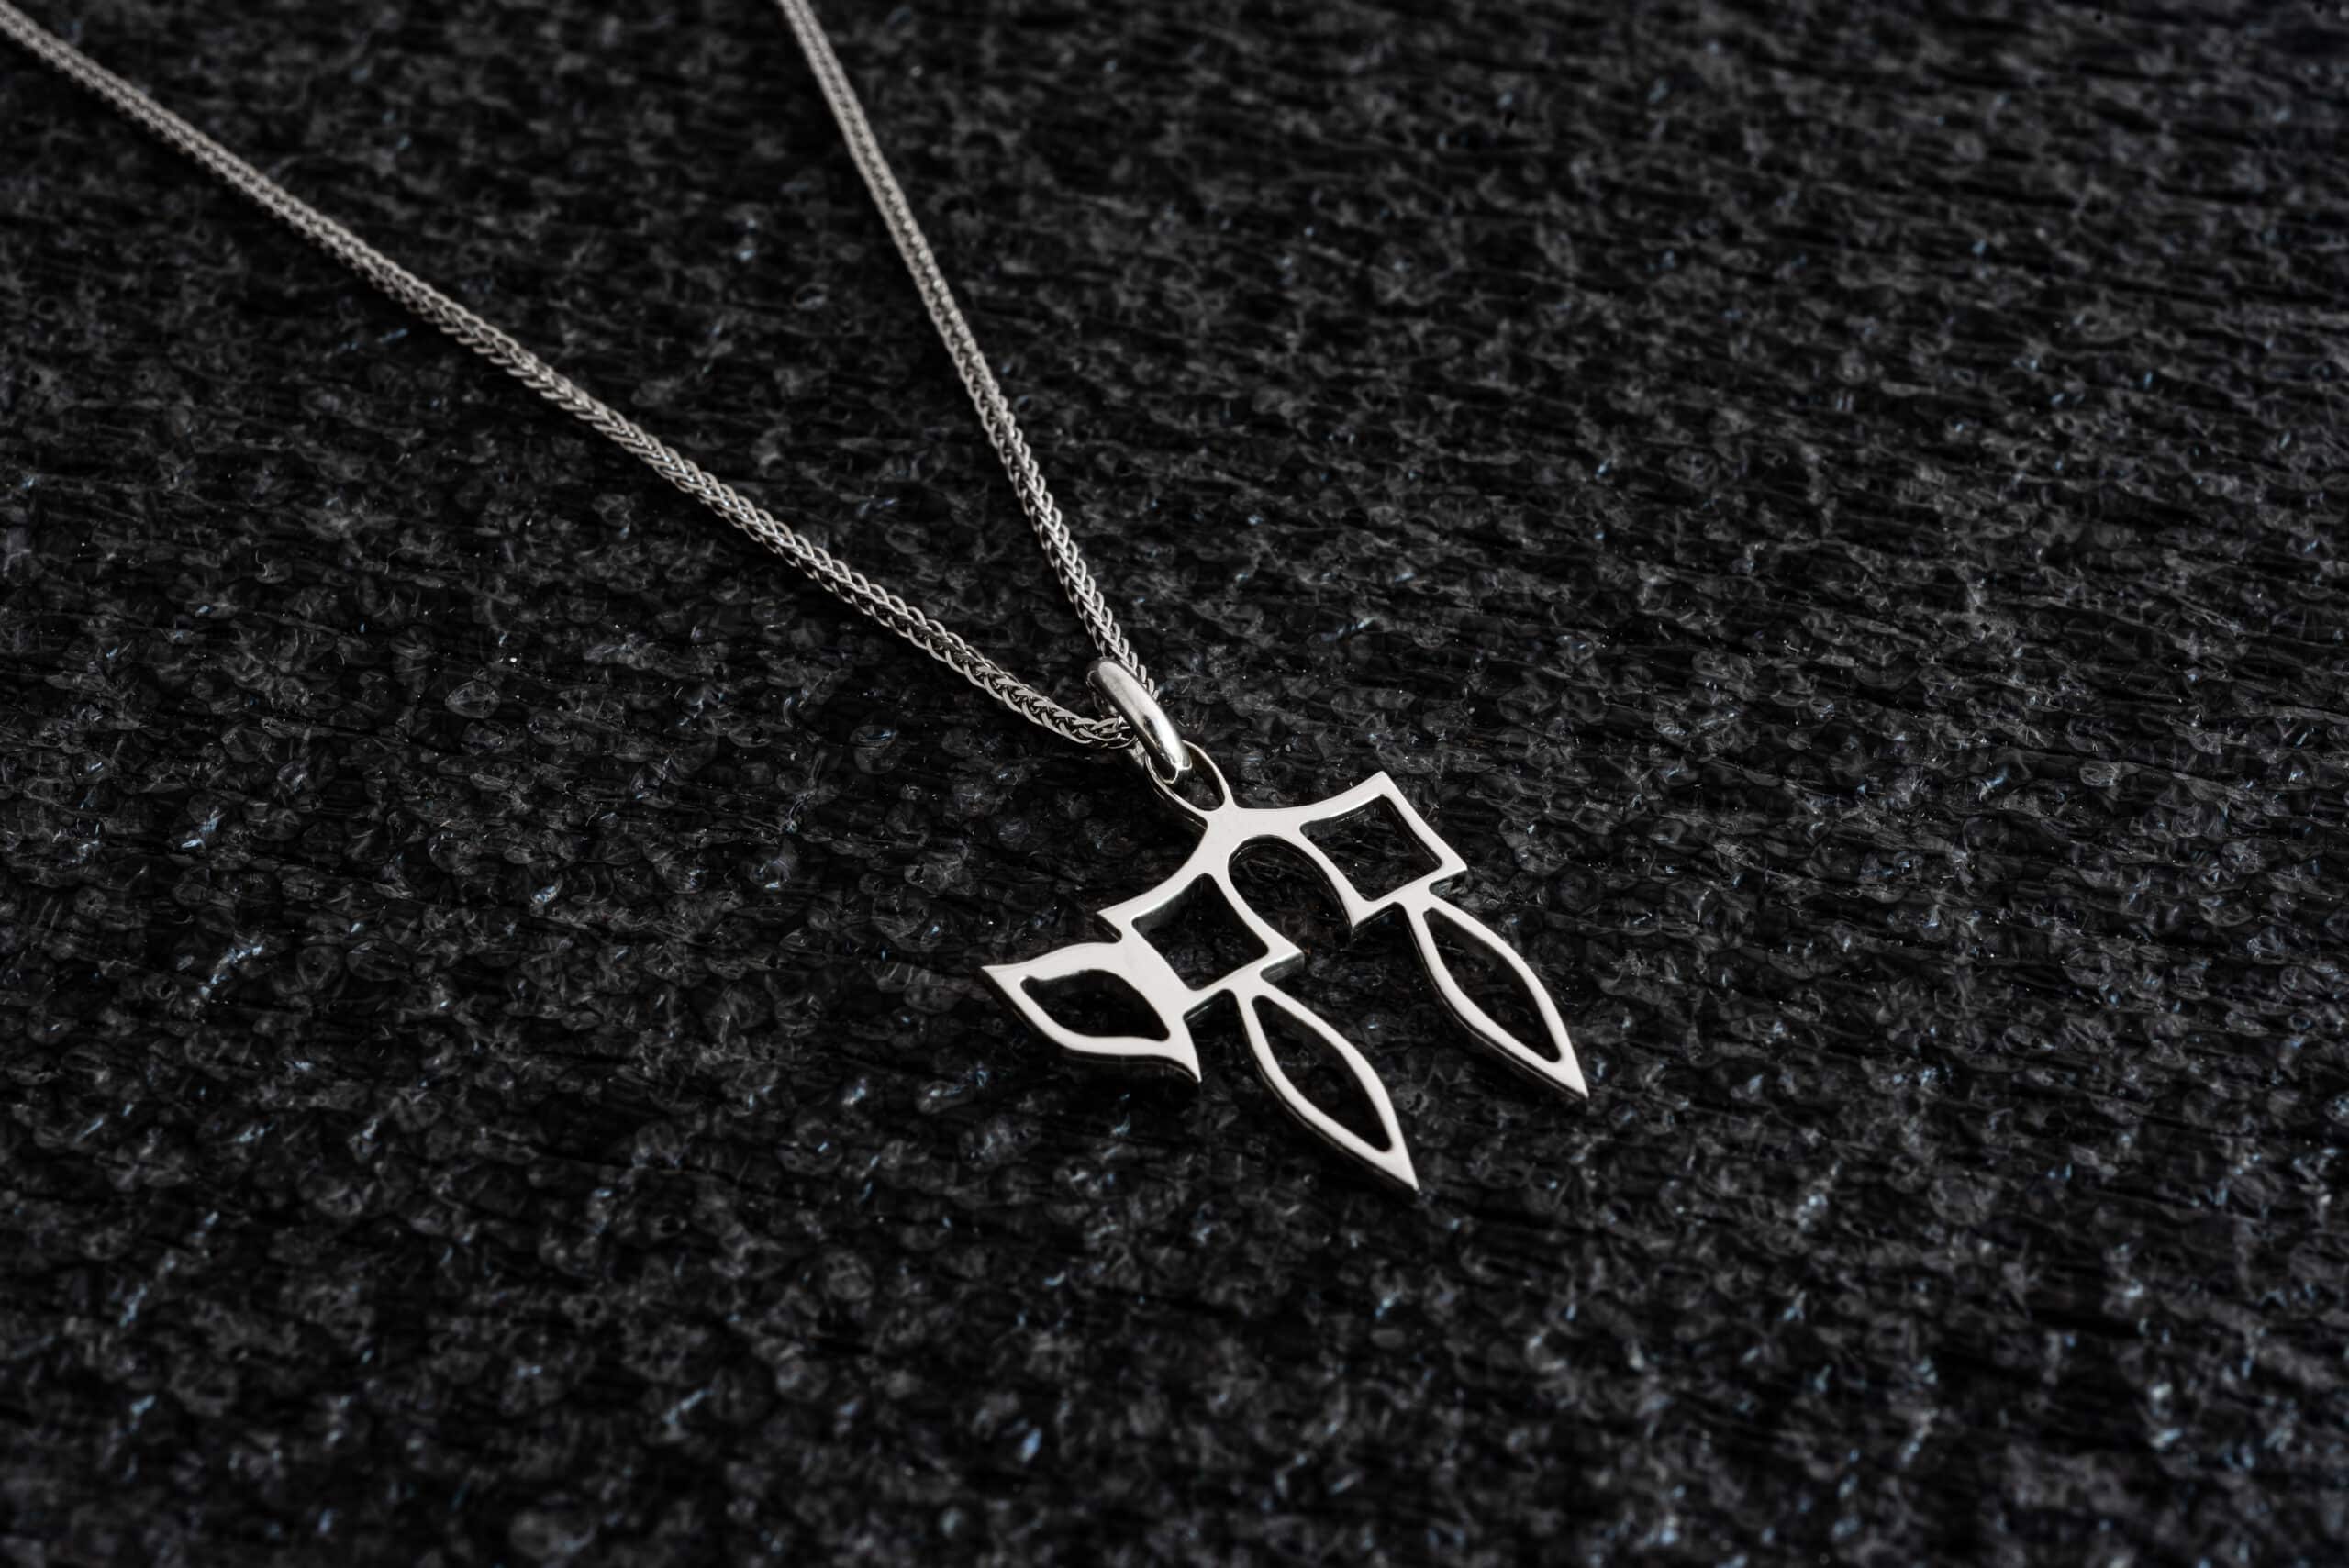 925 Sterling Silver Cut-Out Pendant